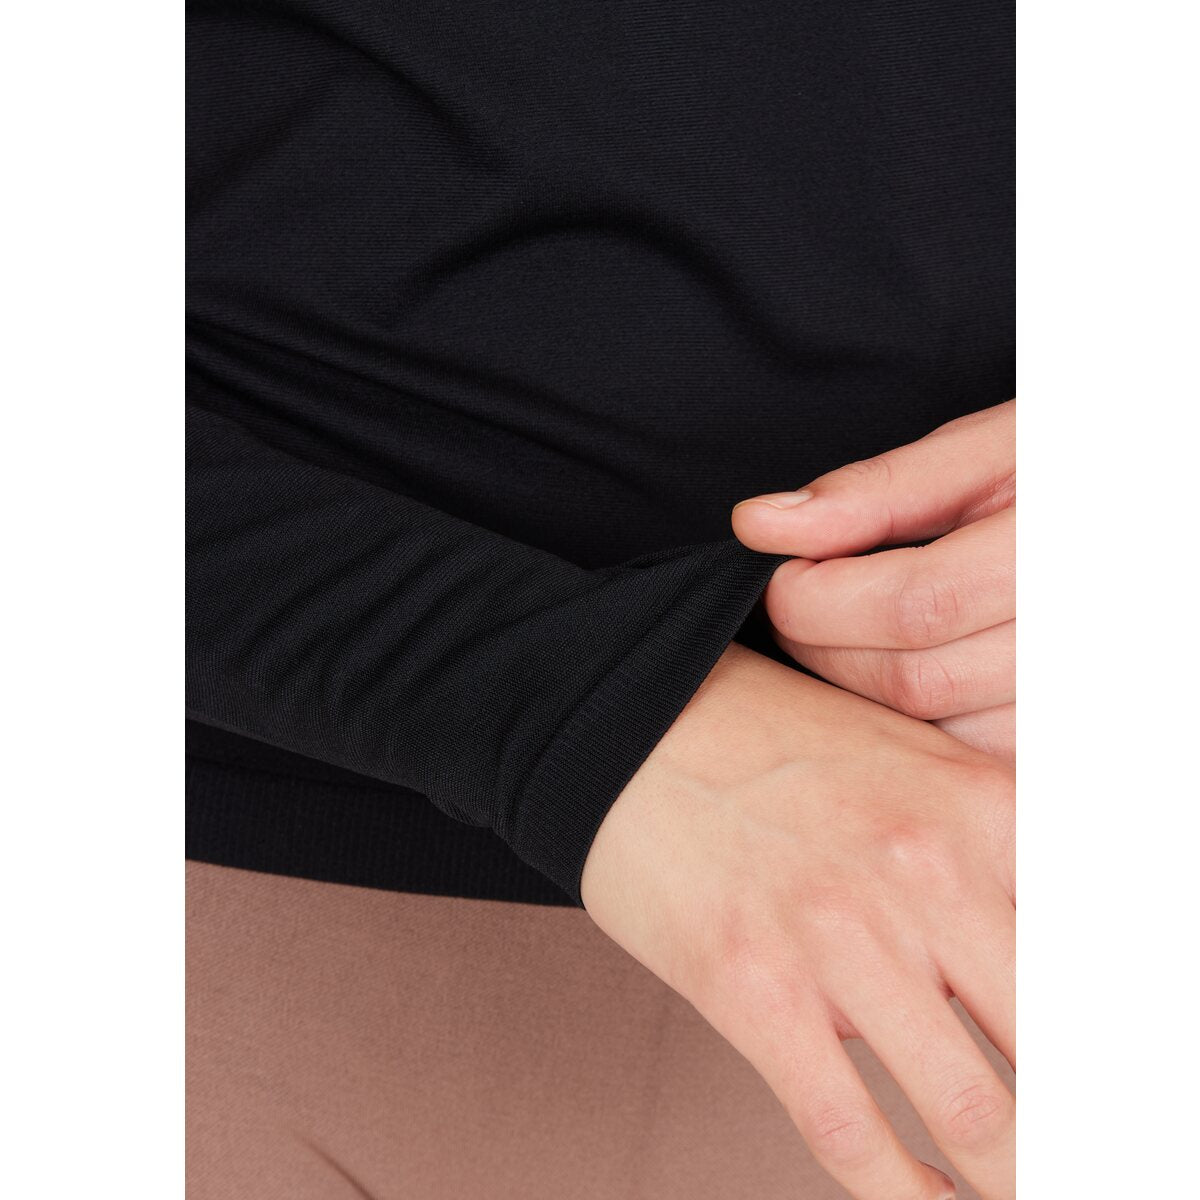 Athlecia Julee Womenswear Loose Fit Long Sleeve Seamless Tee - Black 5 Shaws Department Stores